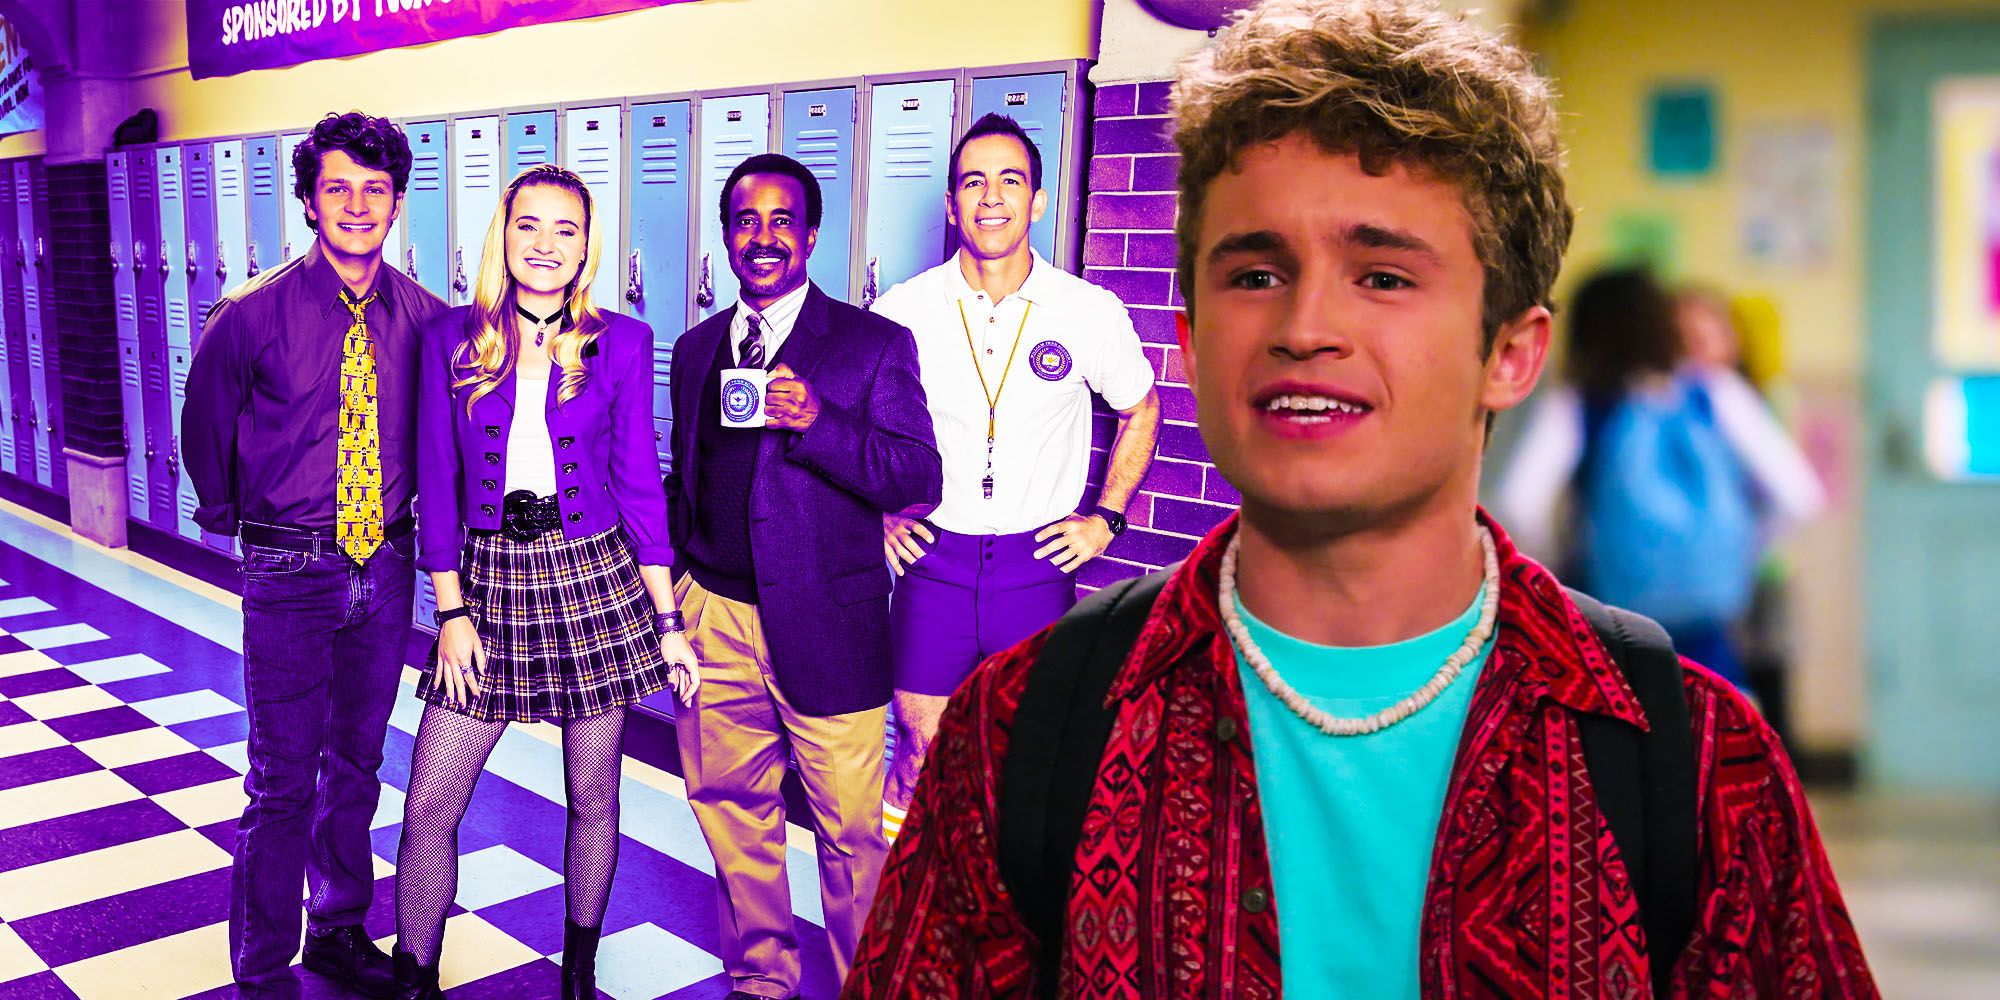 Why ABC cancelled the goldbergs spinoff Schooled